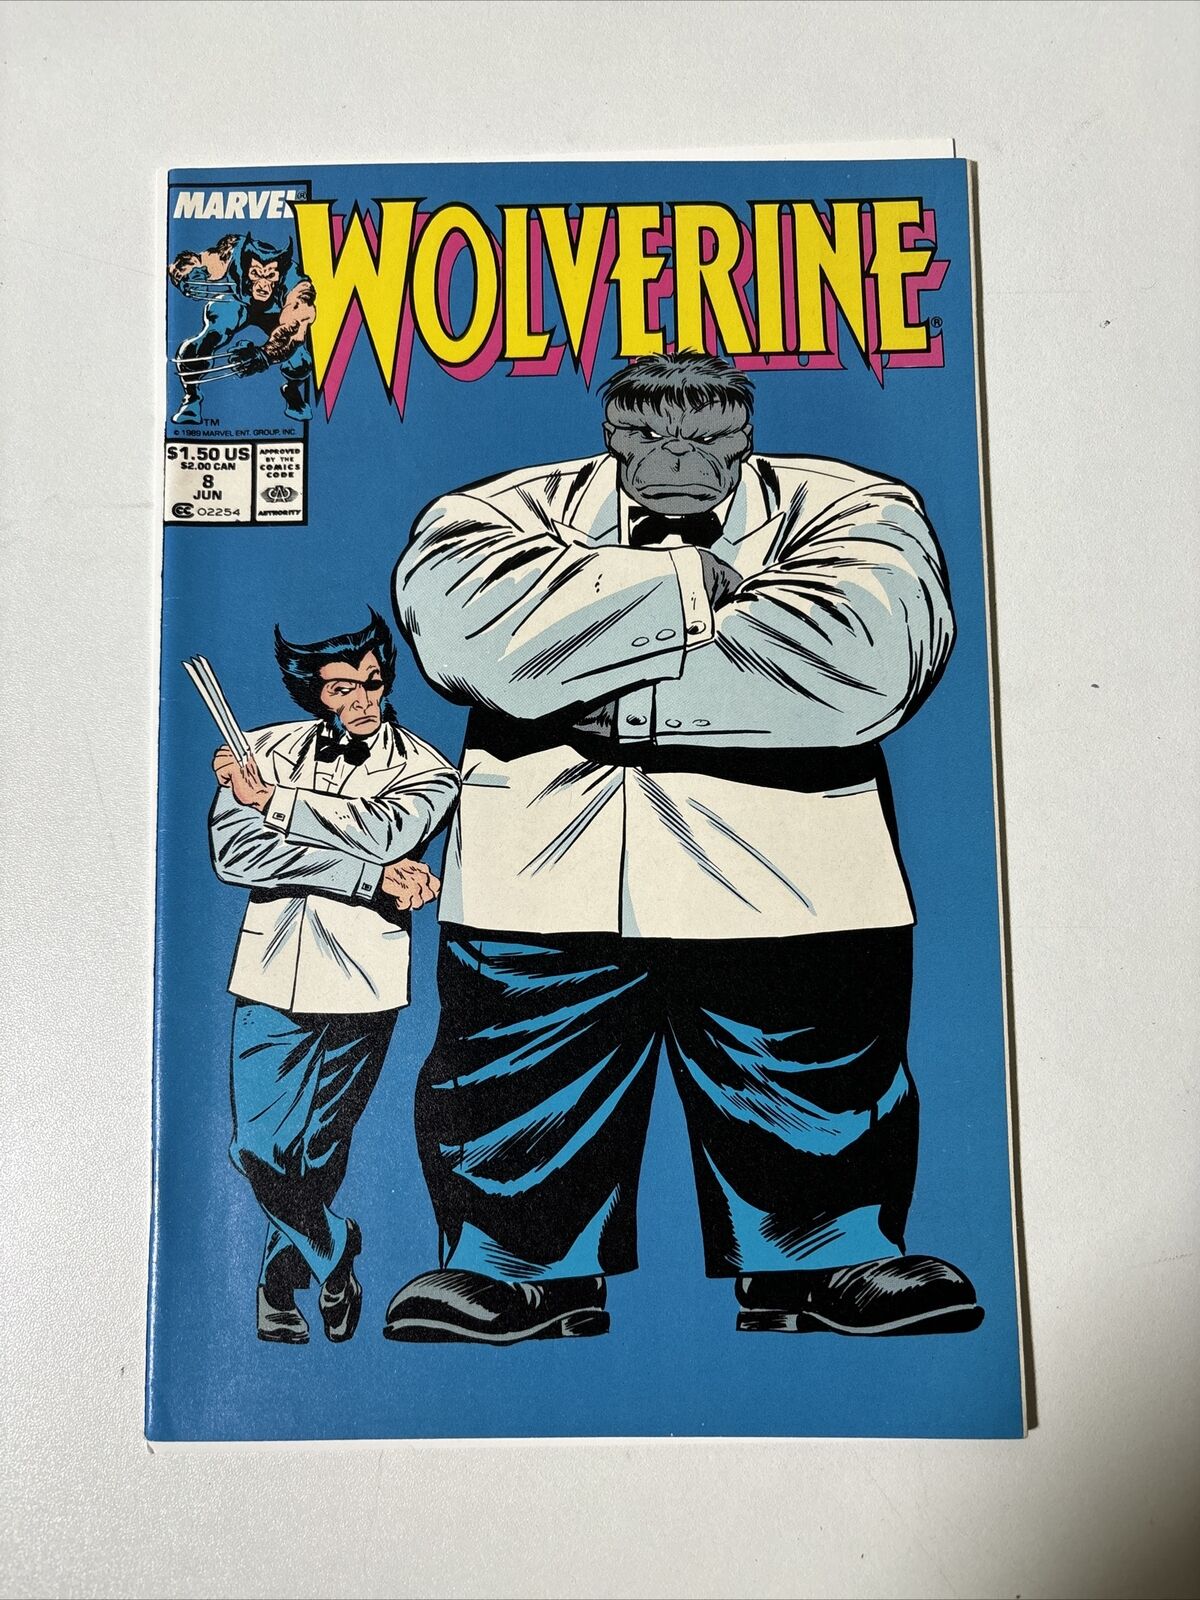 Wolverine #8 (1989) Mr. Fixit Appearance Hulk Classic Cover